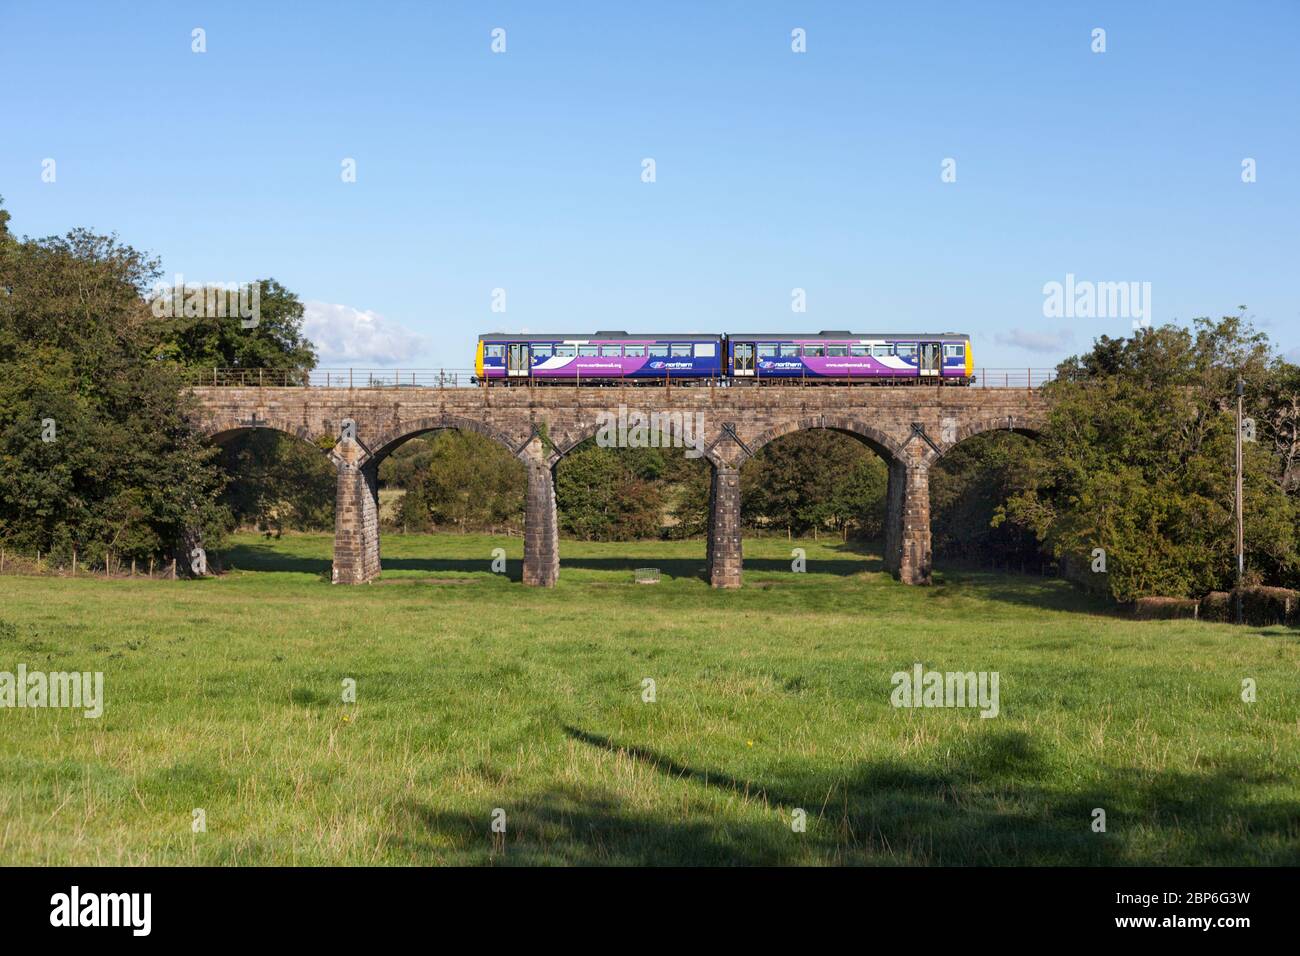 Northern Rail class 142 pacer train crossing the arch viaduct at Capenwray on the scenic 'little north western' railway line in Lancashire Stock Photo